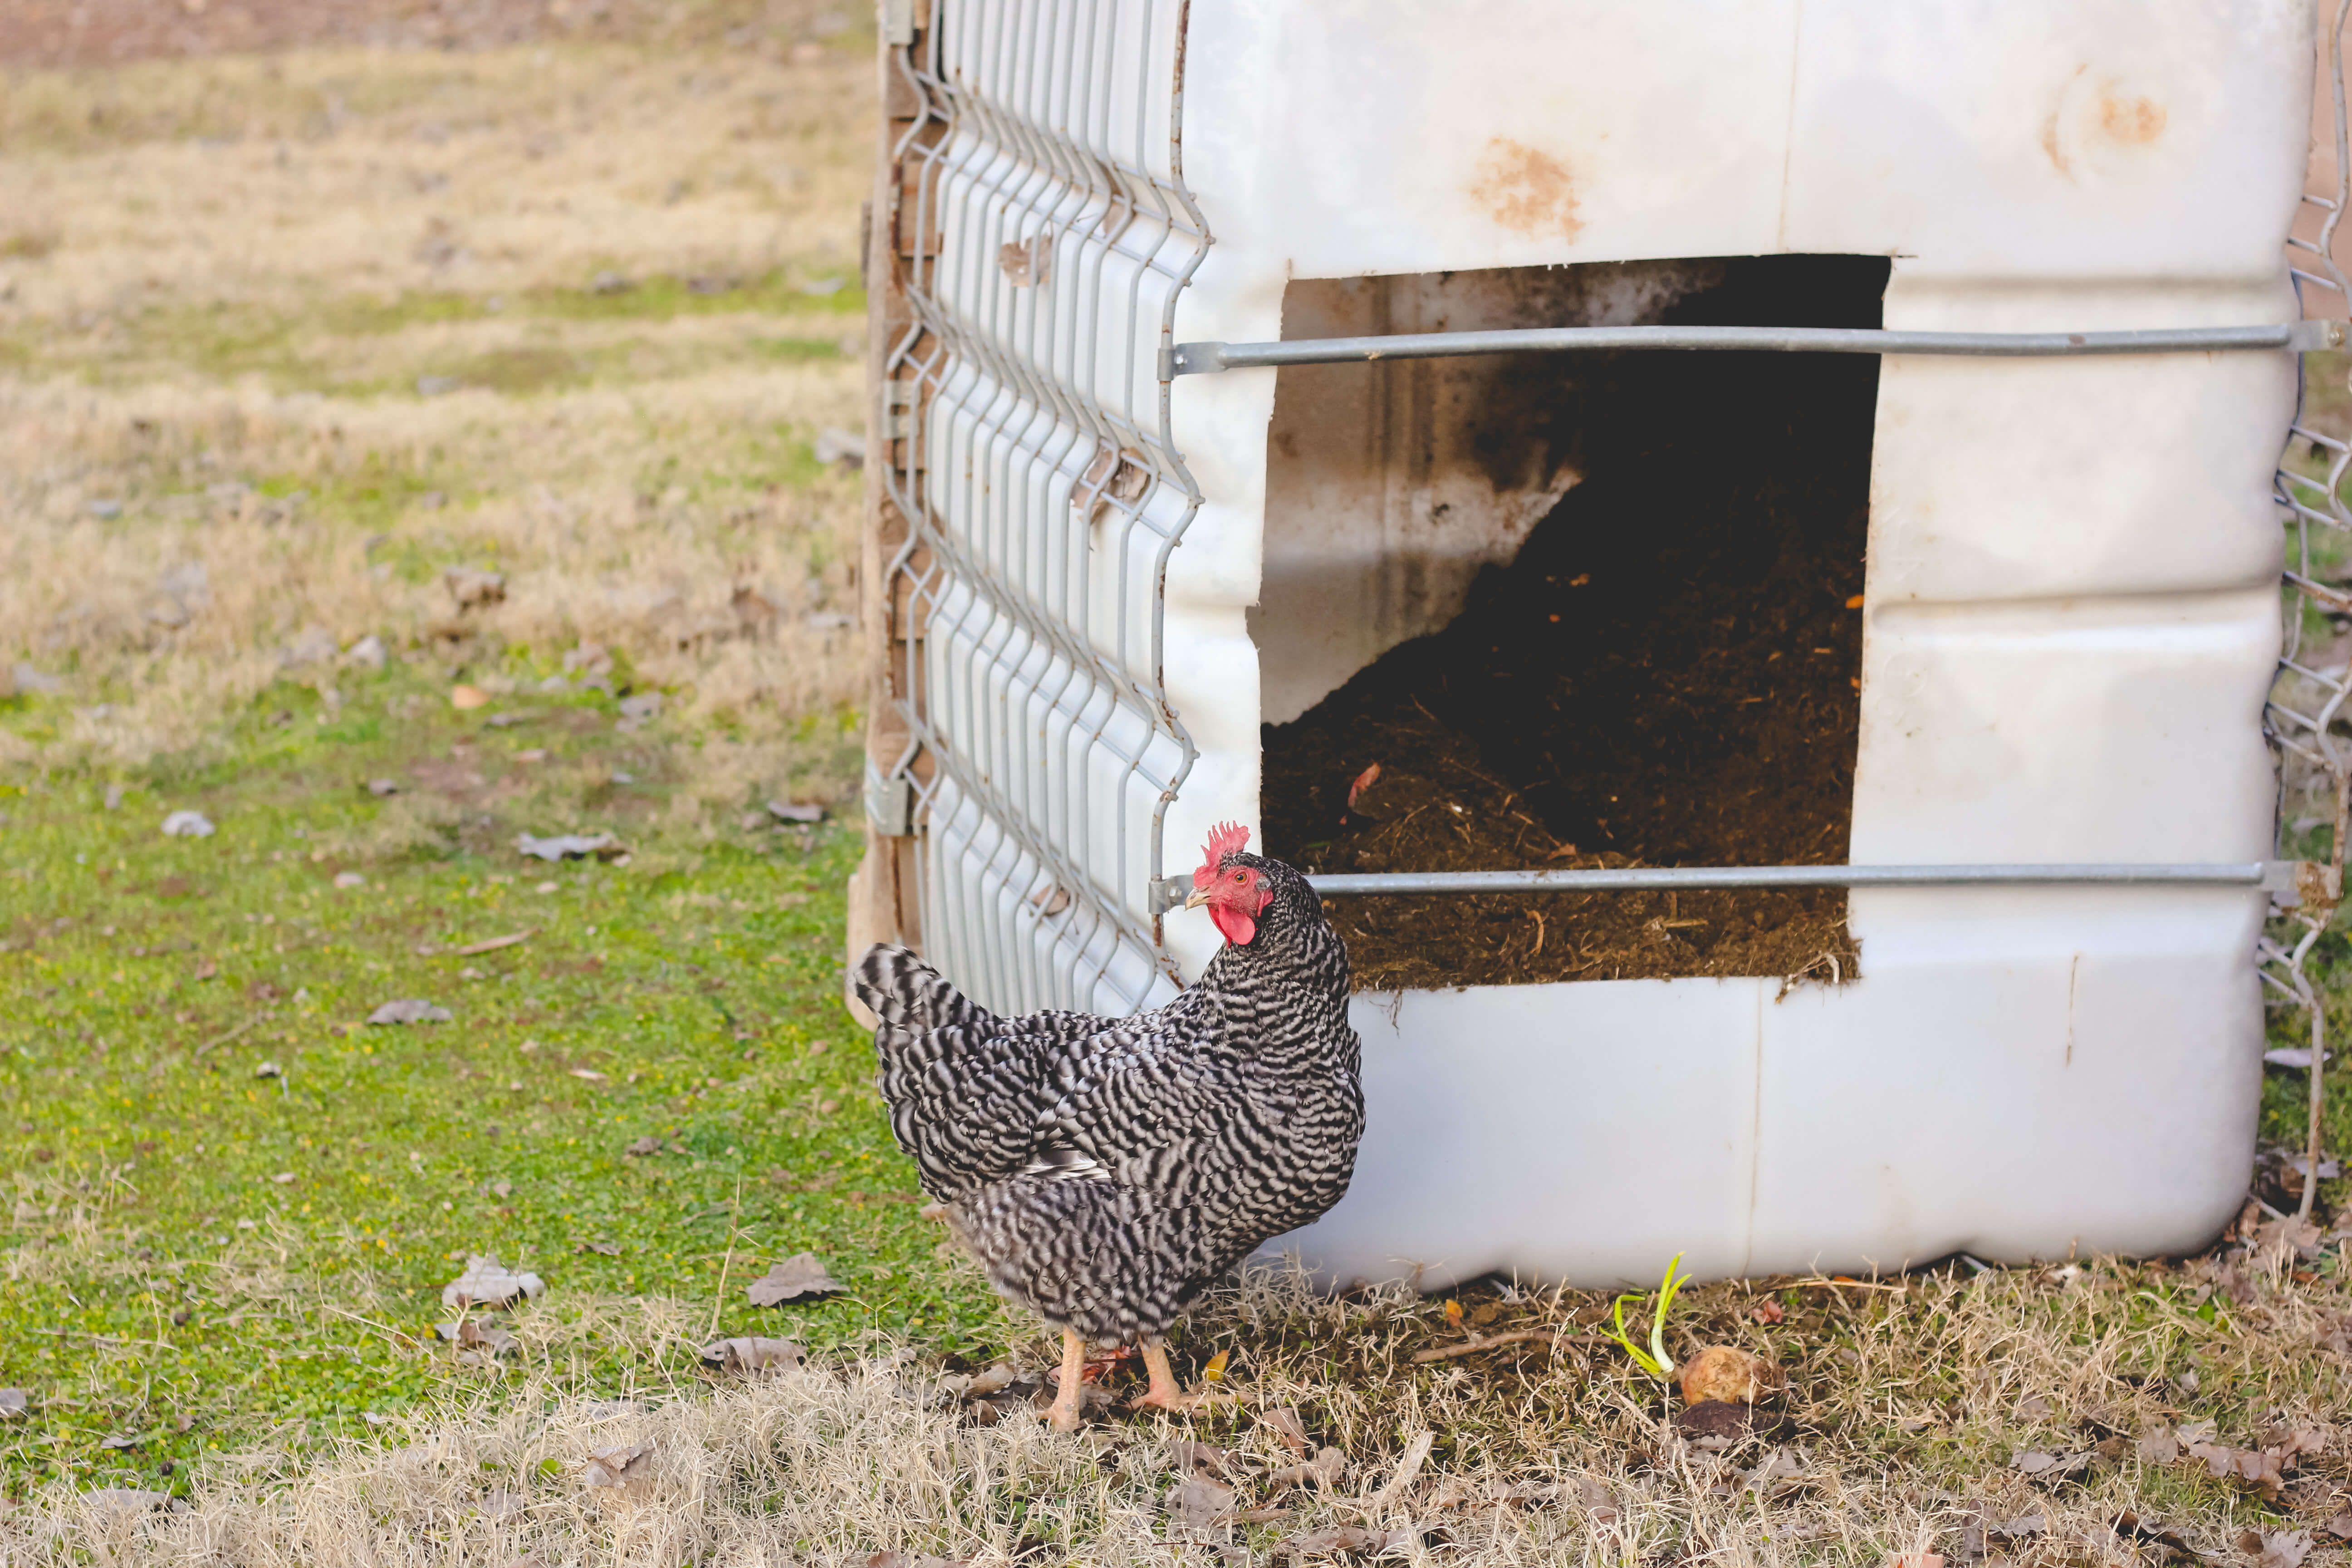 Chicken standing in front of composter